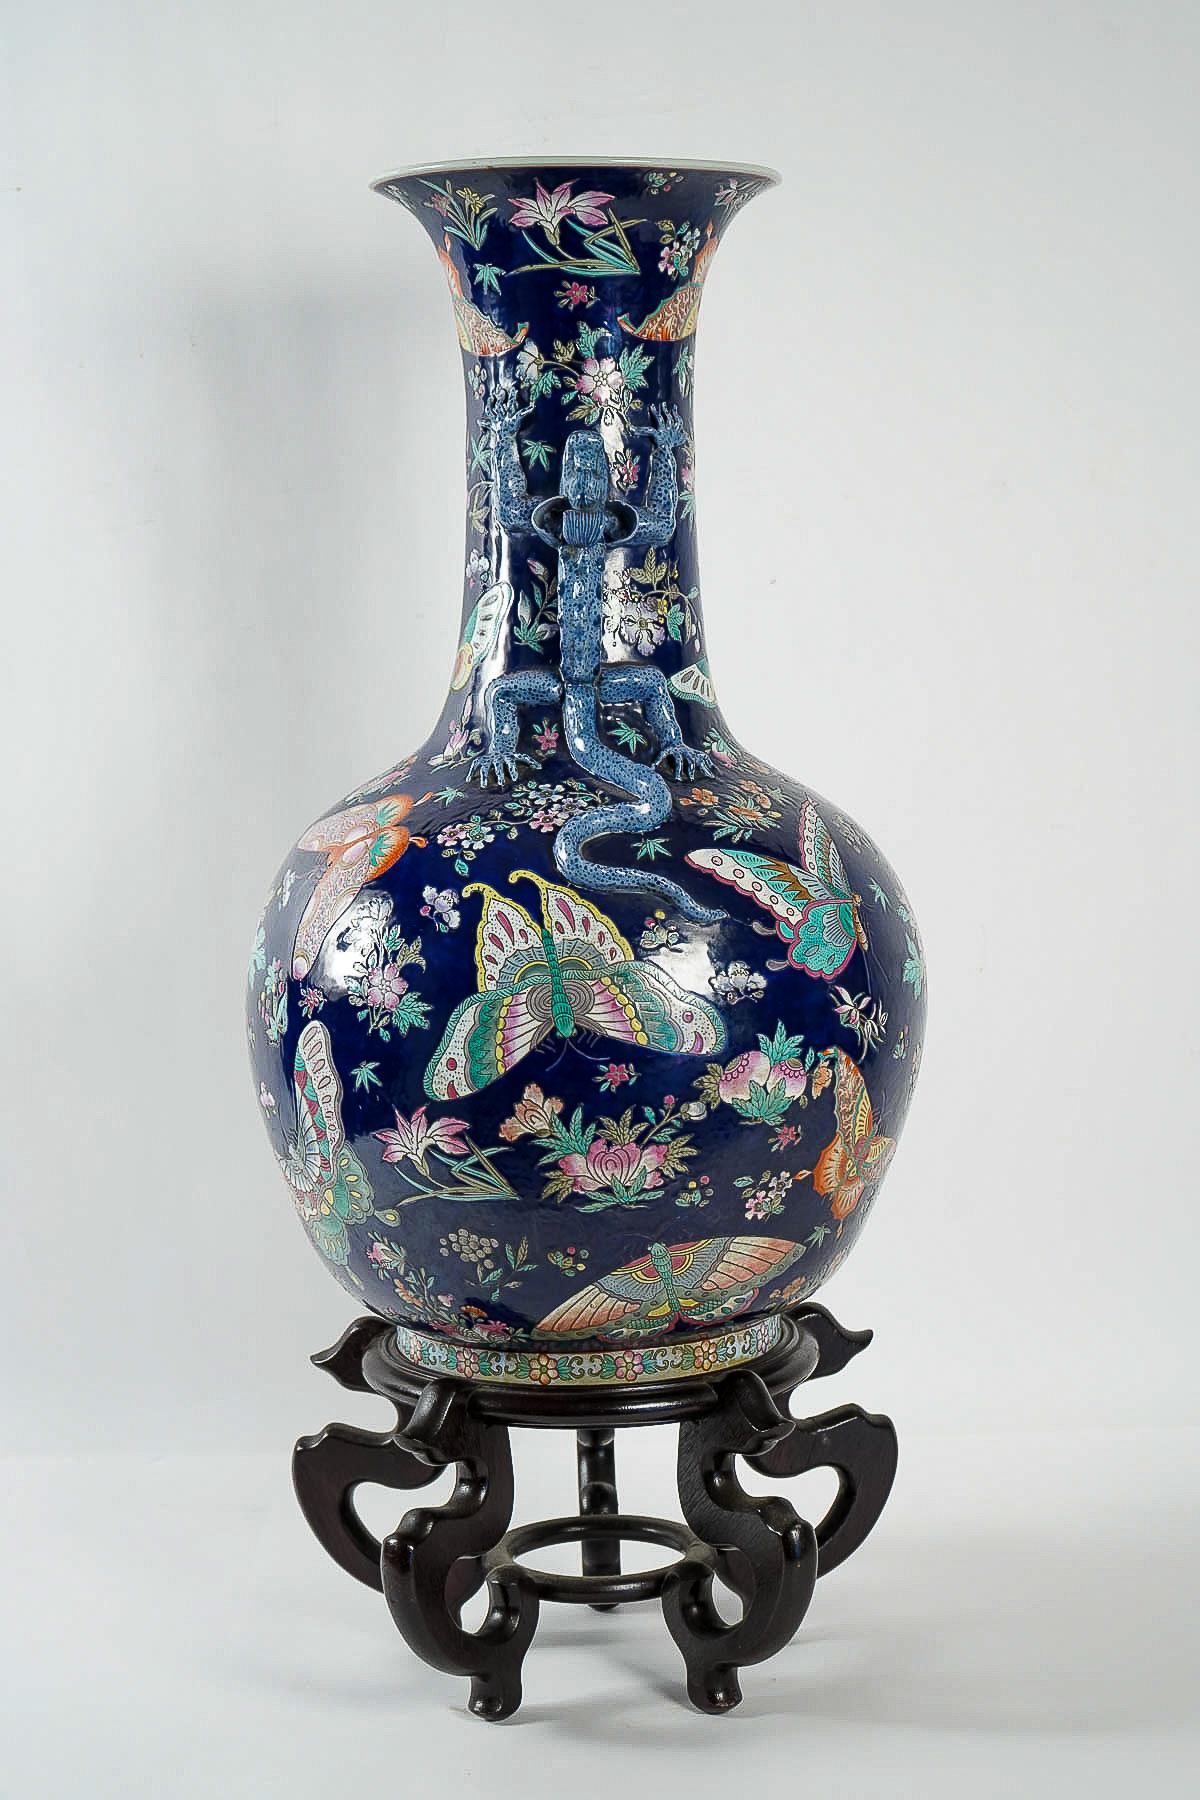 A remarkable Chinese cobalt blue stick neck vase featuring decoration of butterflies and lizards over a deep blue ground. 
Our vase rests in a wood base.

Excellent and decorative Chinese work early 20th century.

Dimensions: H 28.74 inches, H with